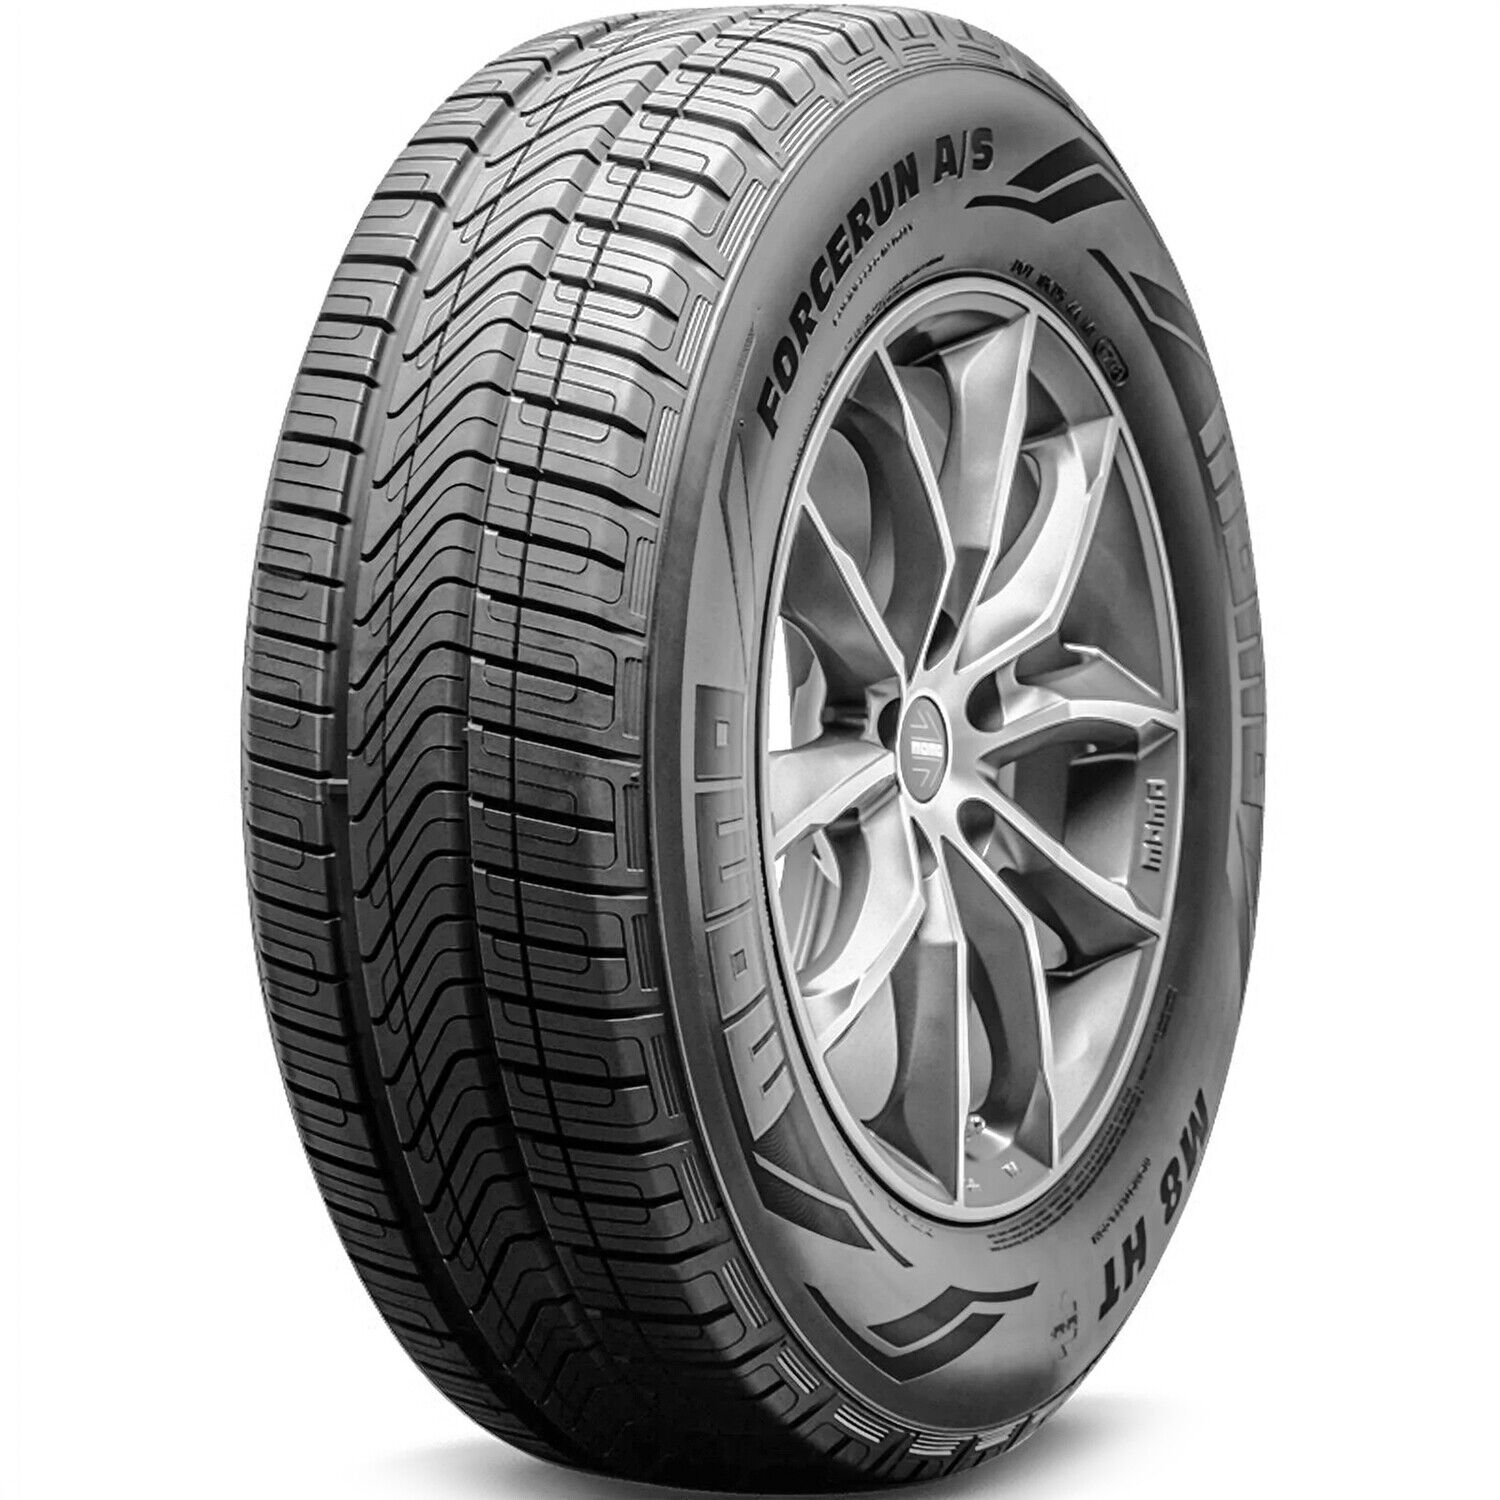 2 Tires MOMO Forcerun M8 HT Pro 235/55R18 104V AS A/S All Season